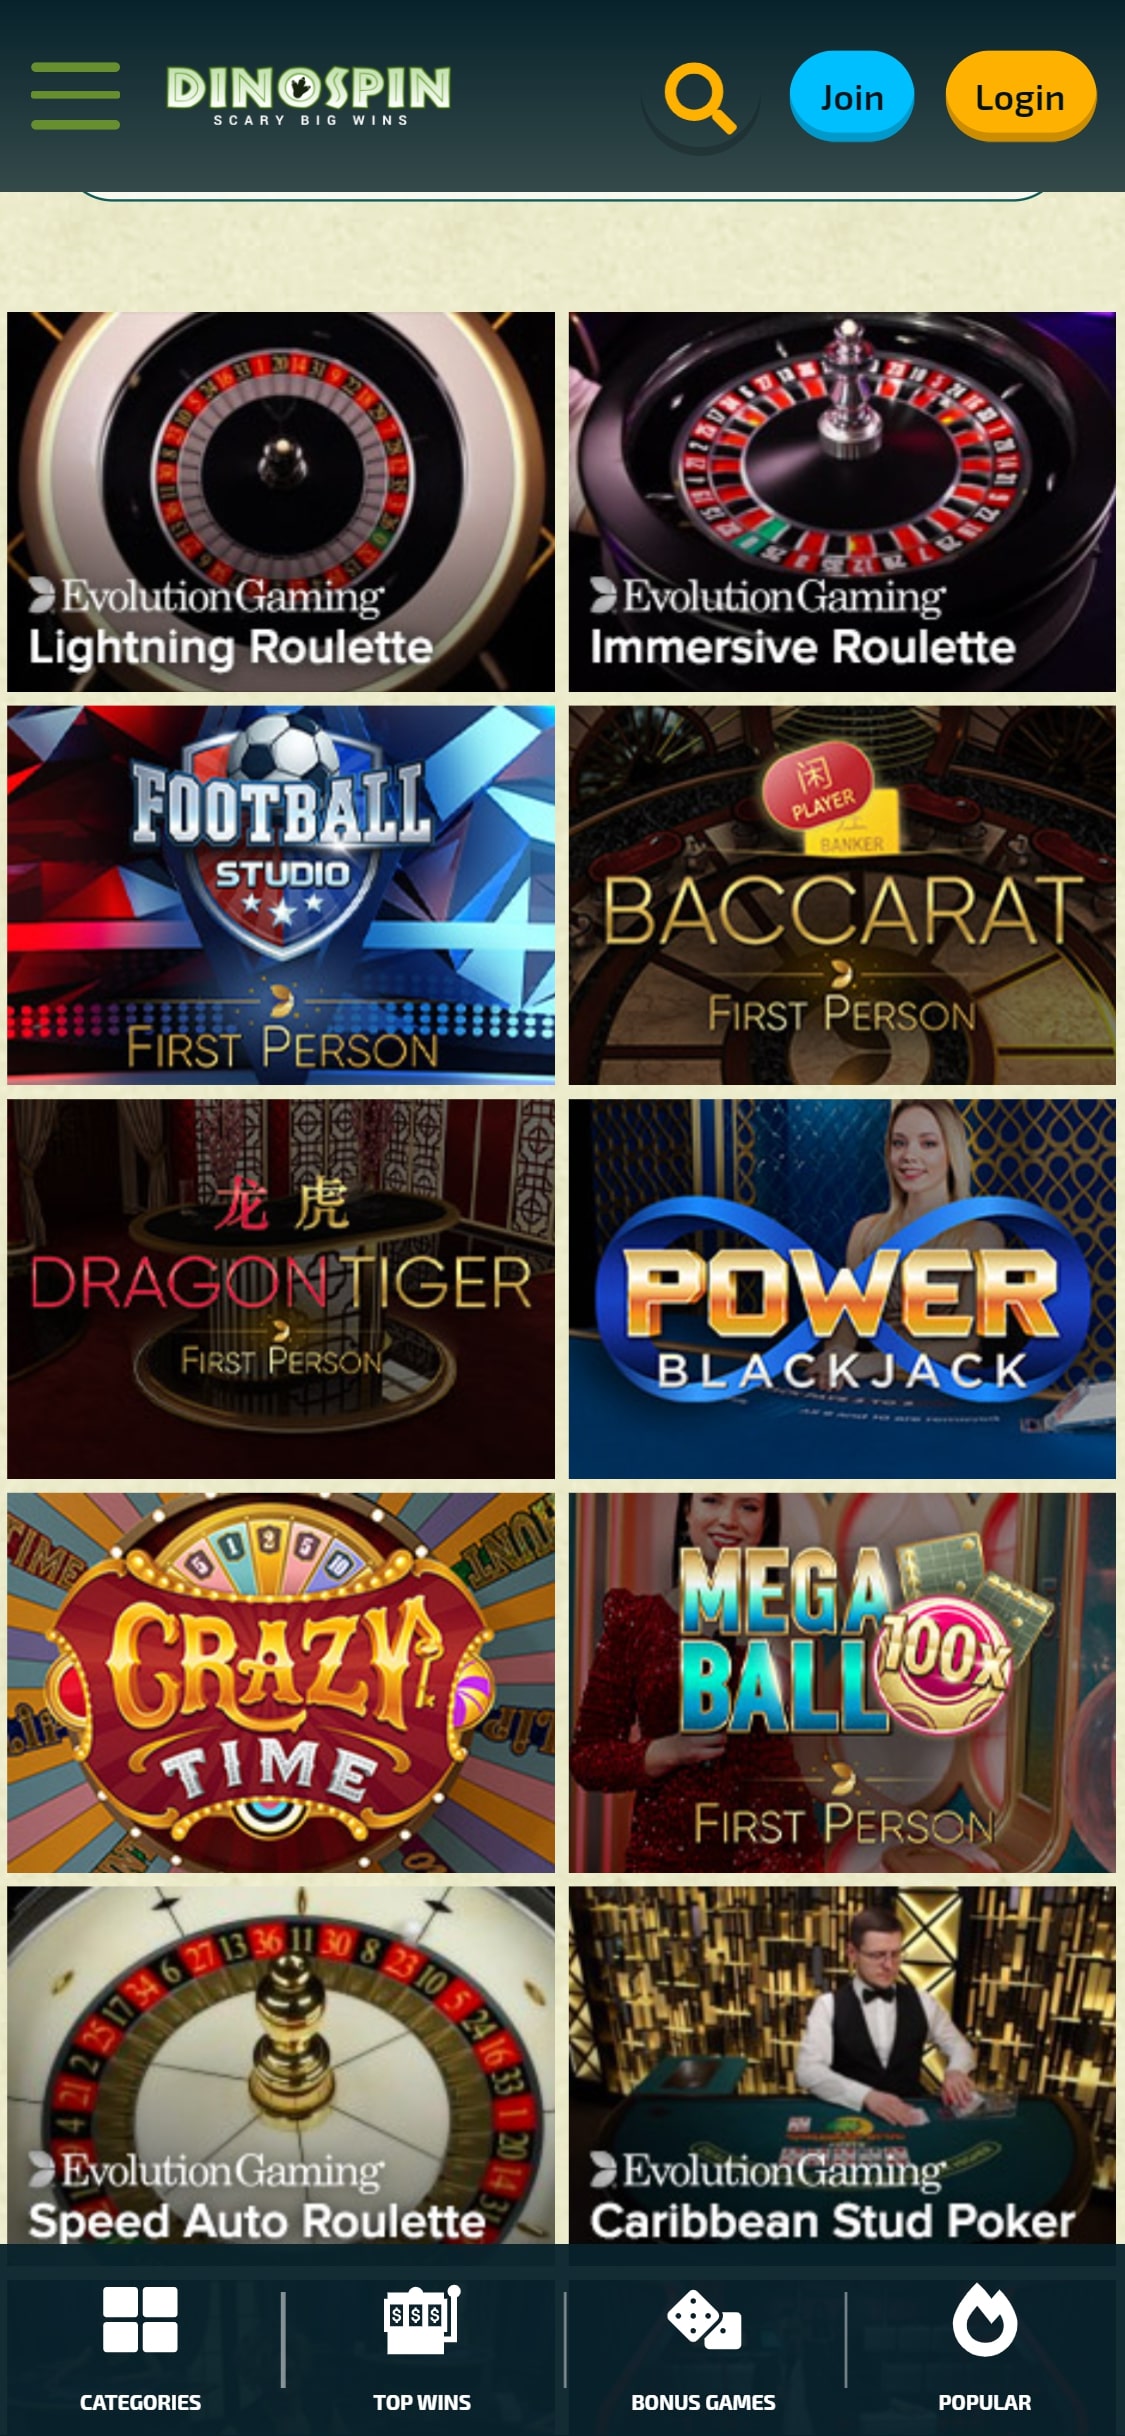 DinoSpin Casino Mobile Live Dealer Games Review